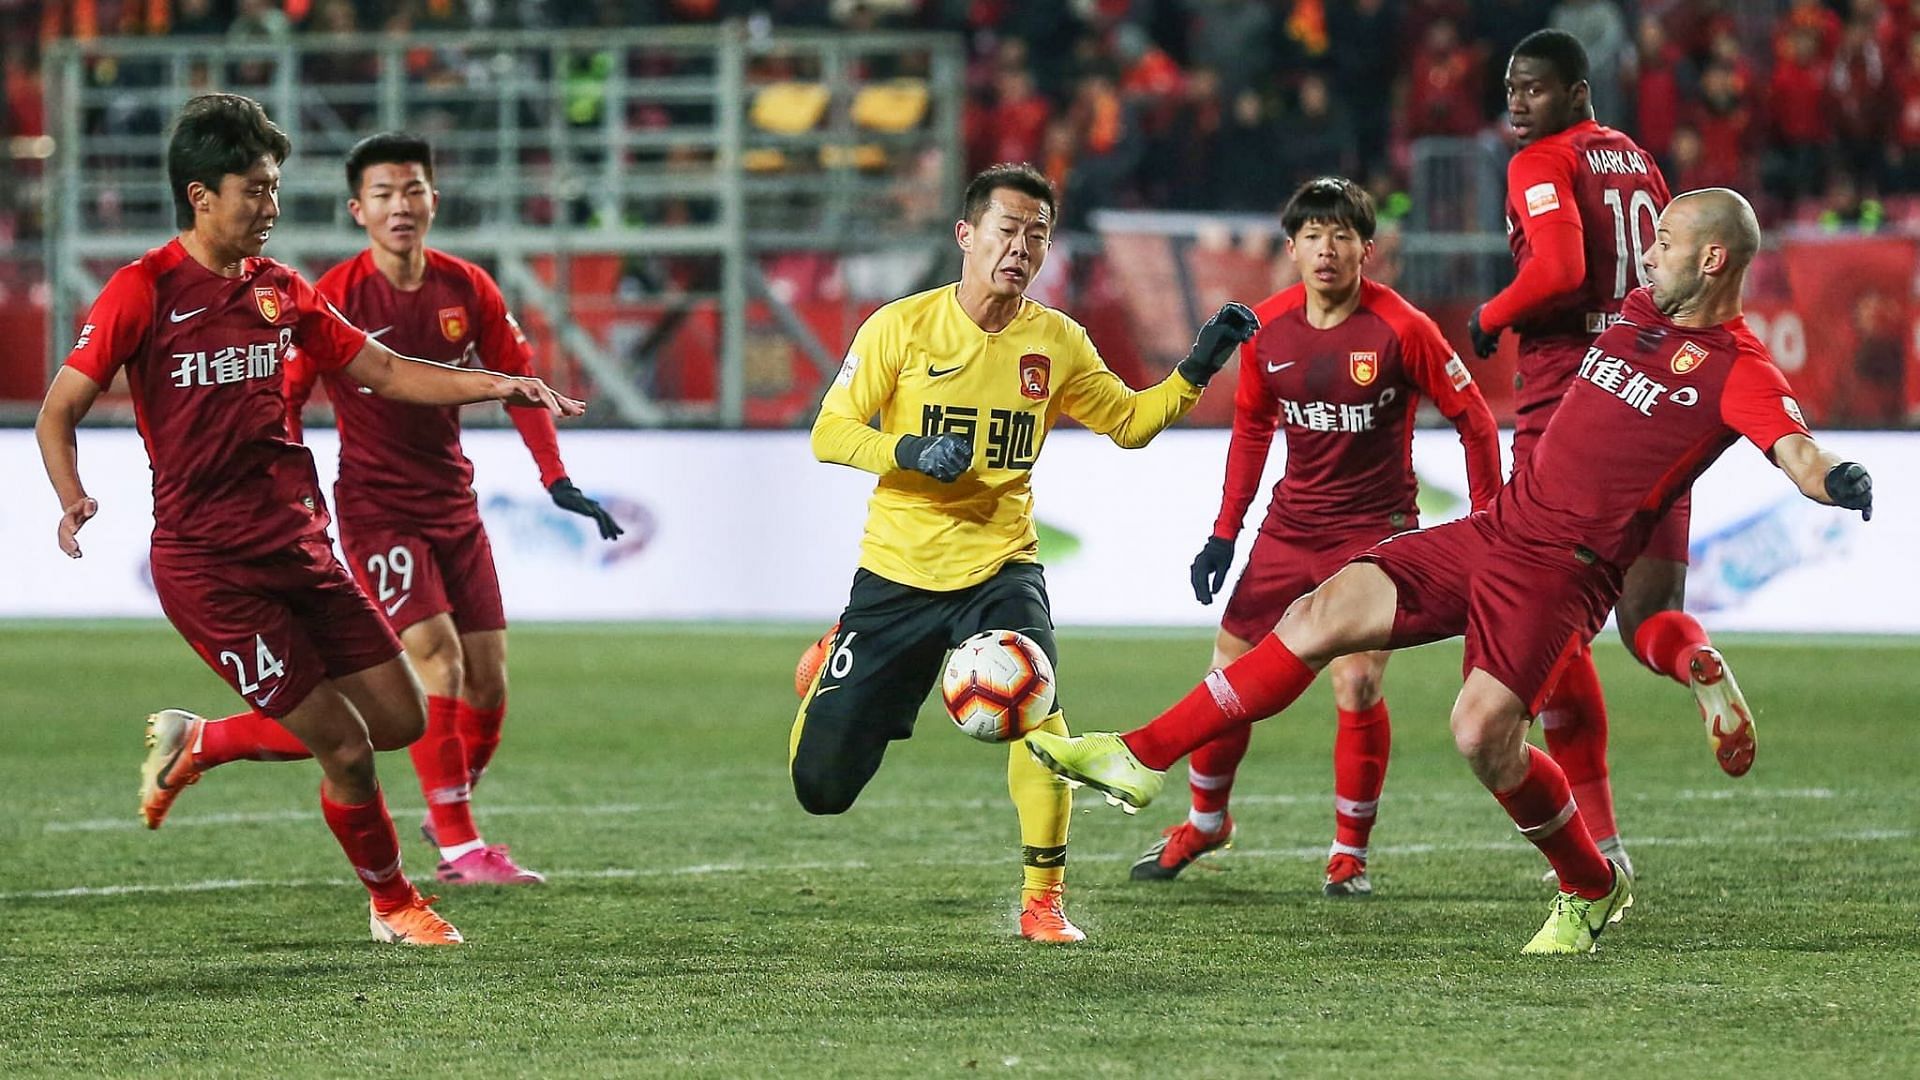 Hebei FC and Guangzhou meet in their Chinese Super League fixture on Monday